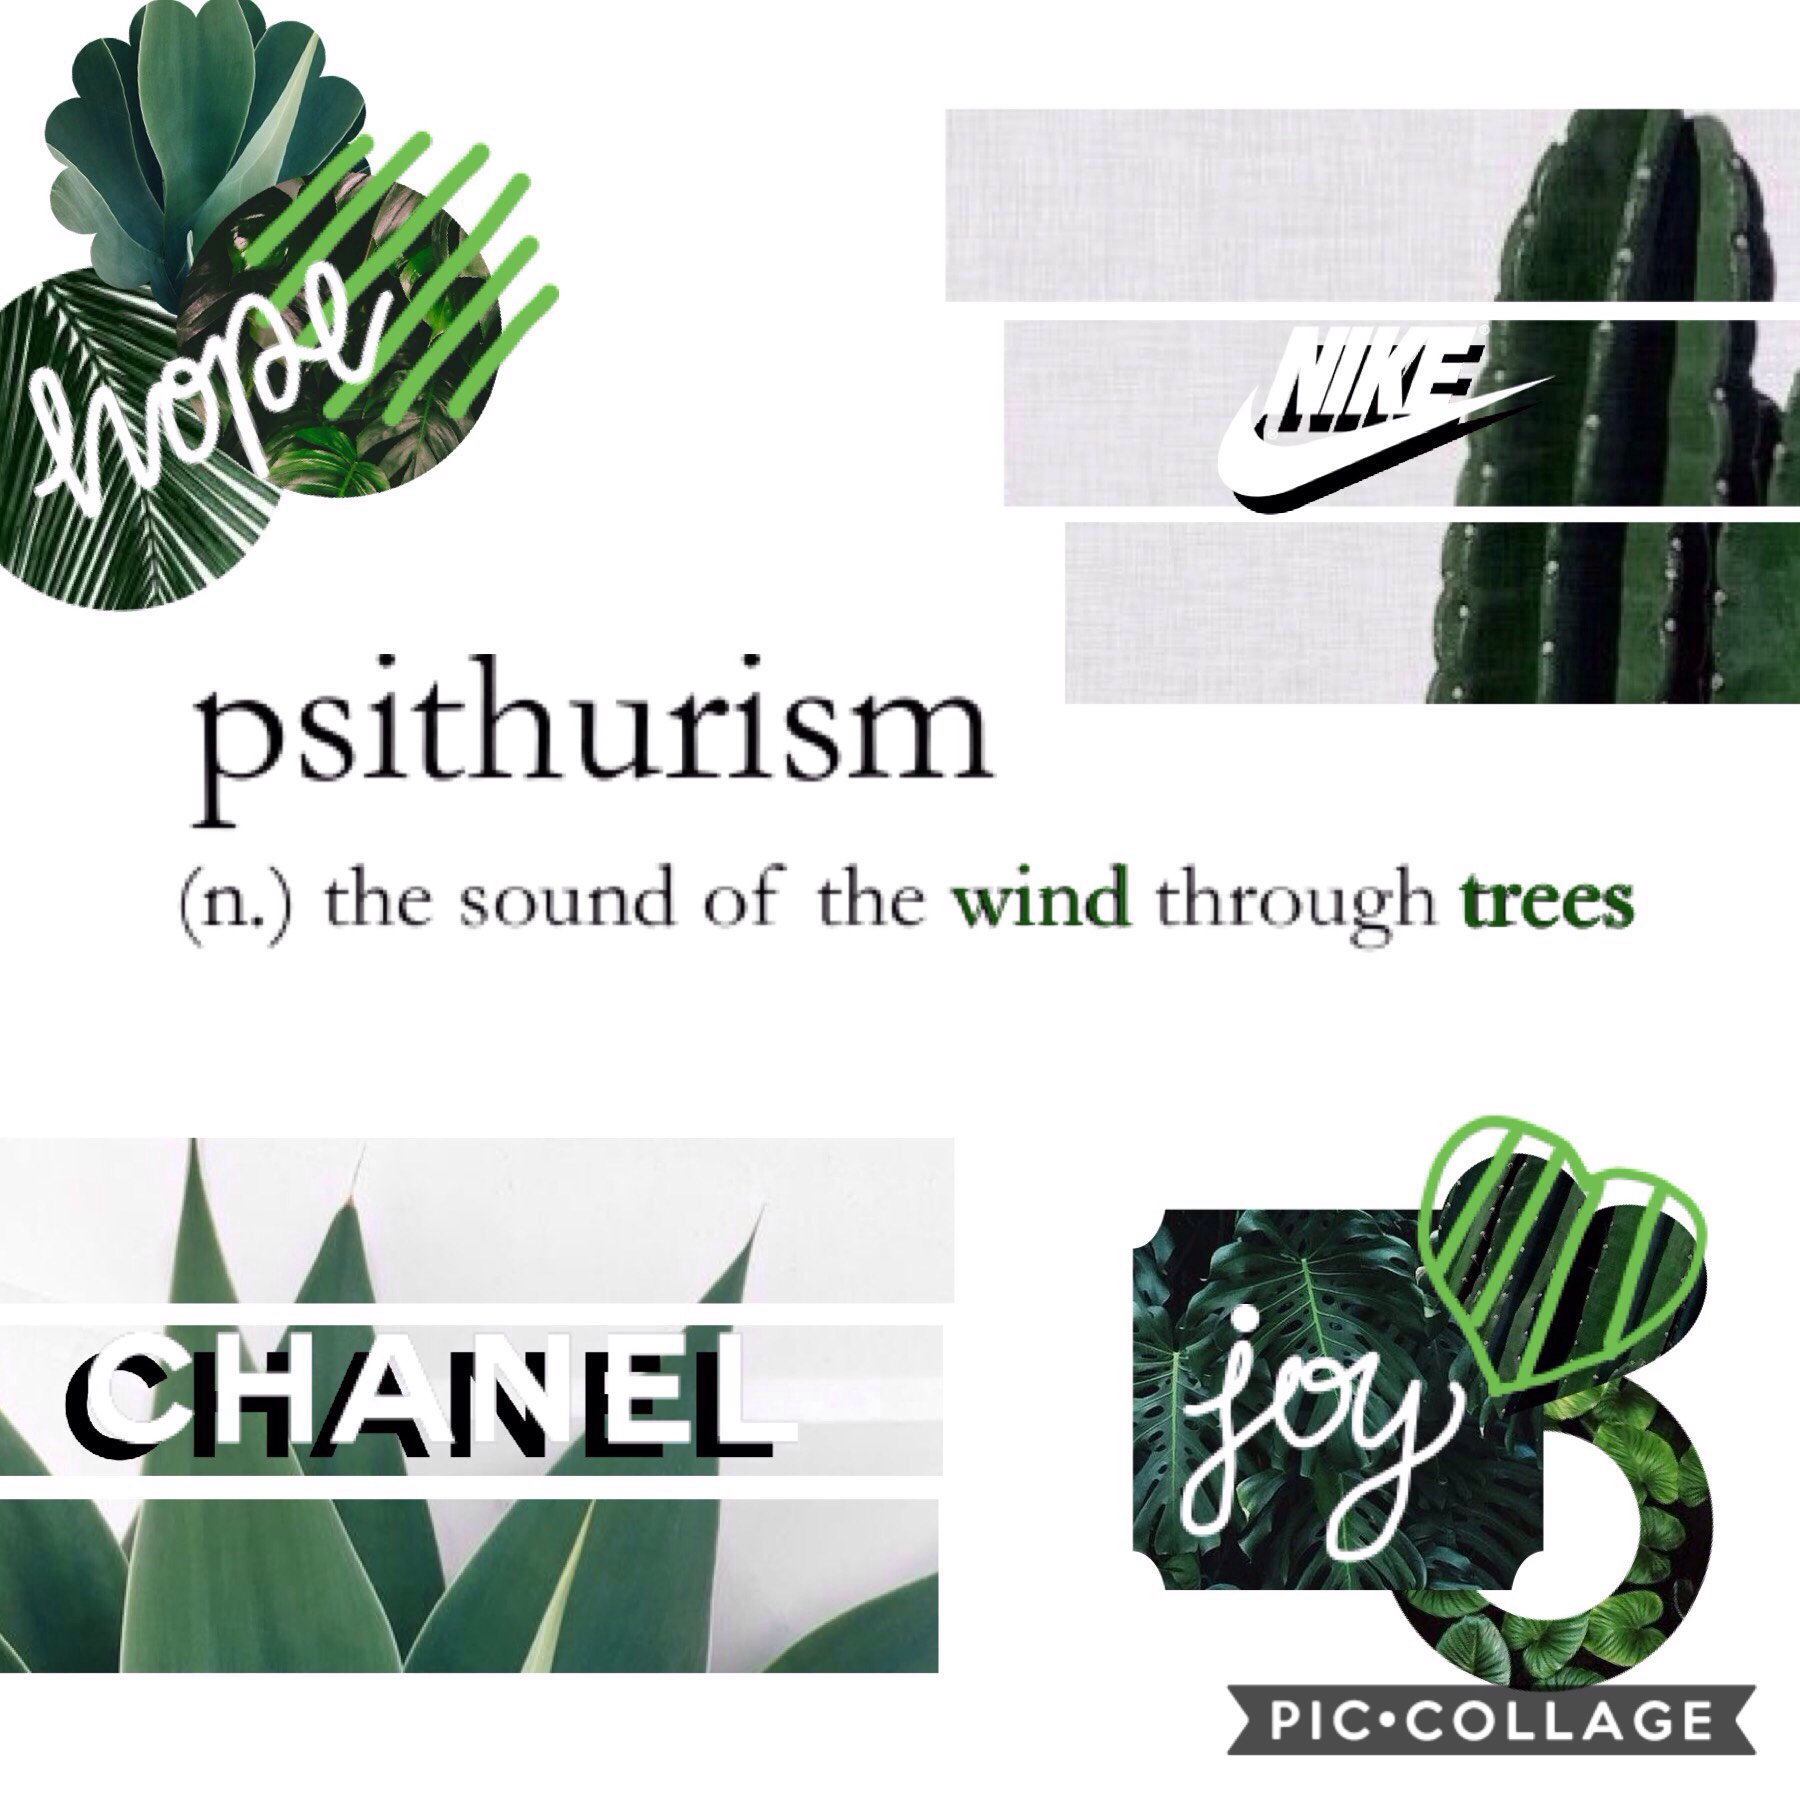 [ psithurism ] ~ 'the sound of the wind through trees'
🌲🌬🌳🌵 [ 17/08 ]
2nd collage of this new theme and I already feel refReShEd✨😇
even though assessments are filling my mind, I'm making room for you guys!🤗 I hope you week is going well and byeee! tyys!
m